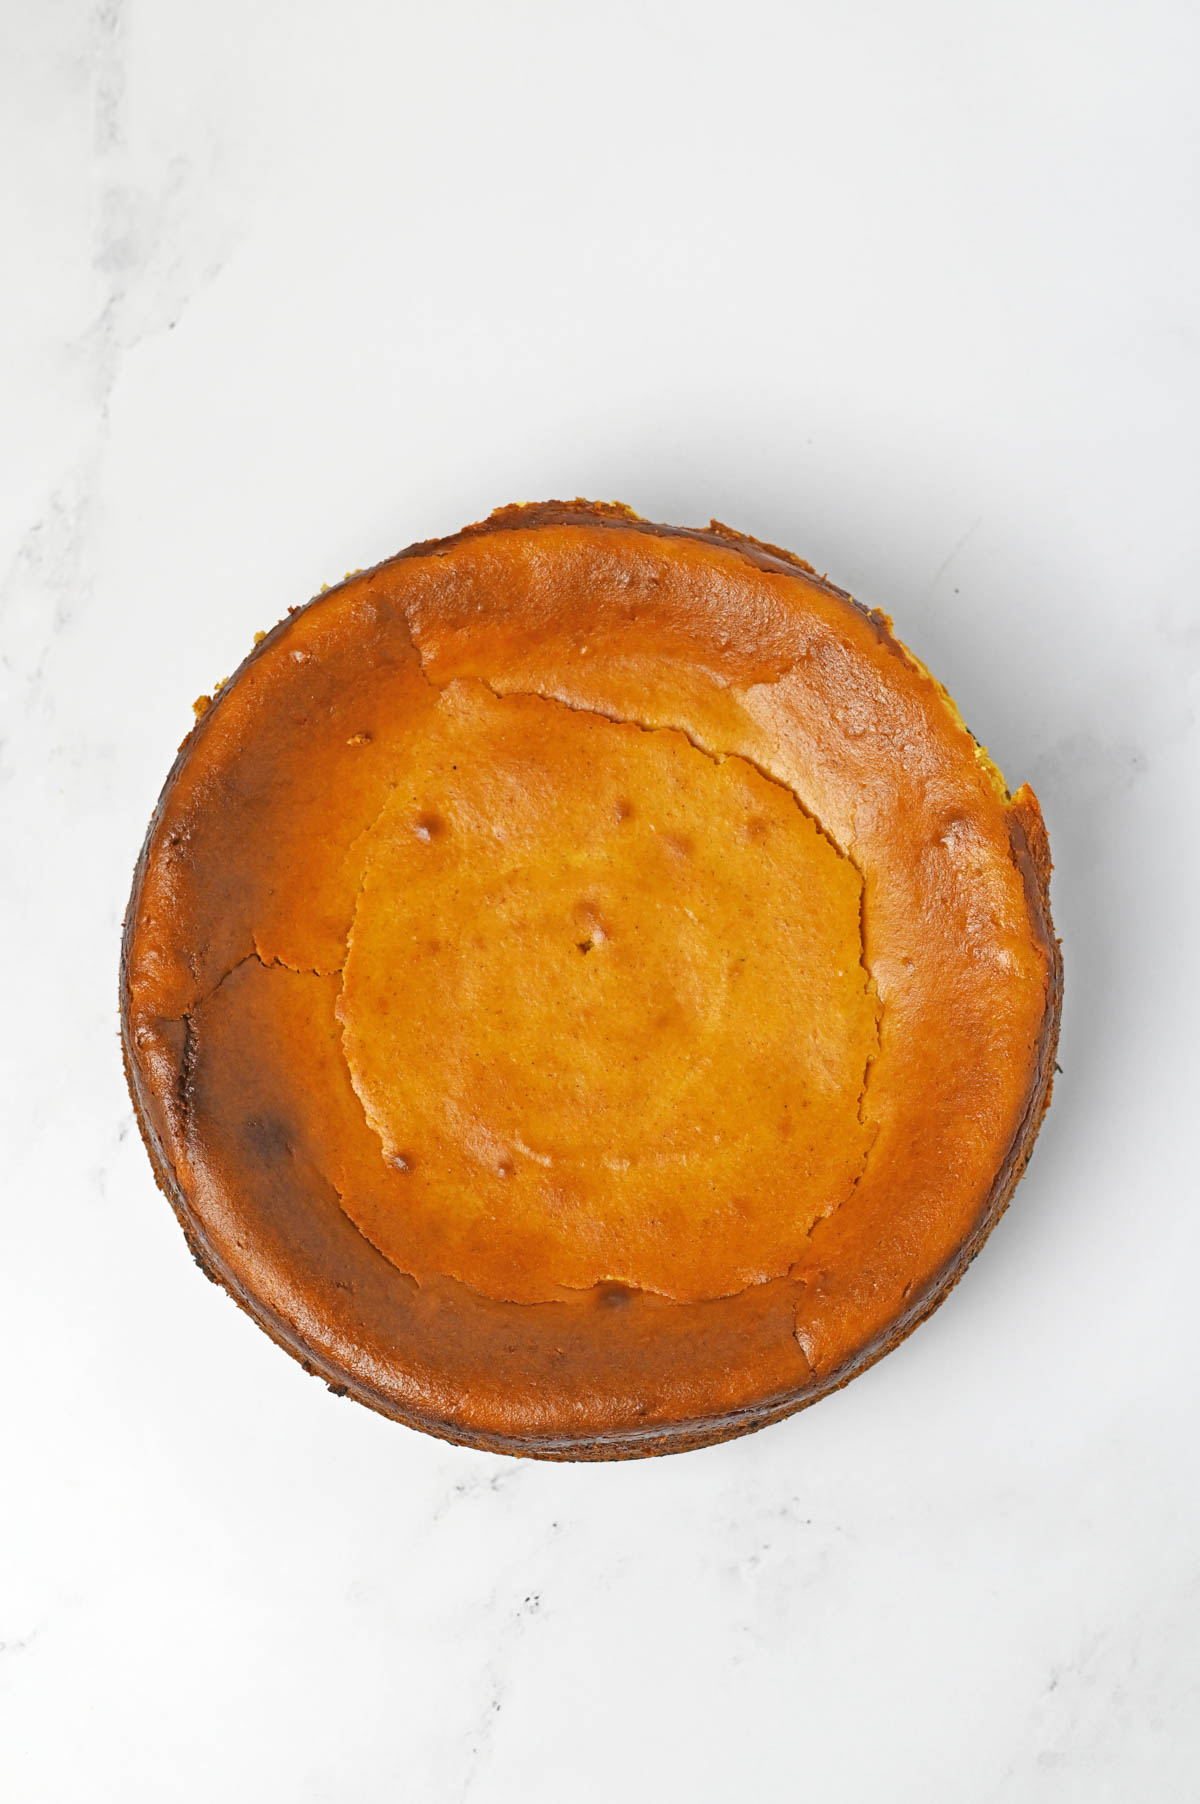 Baked pumpkin cheesecake on white marble counter